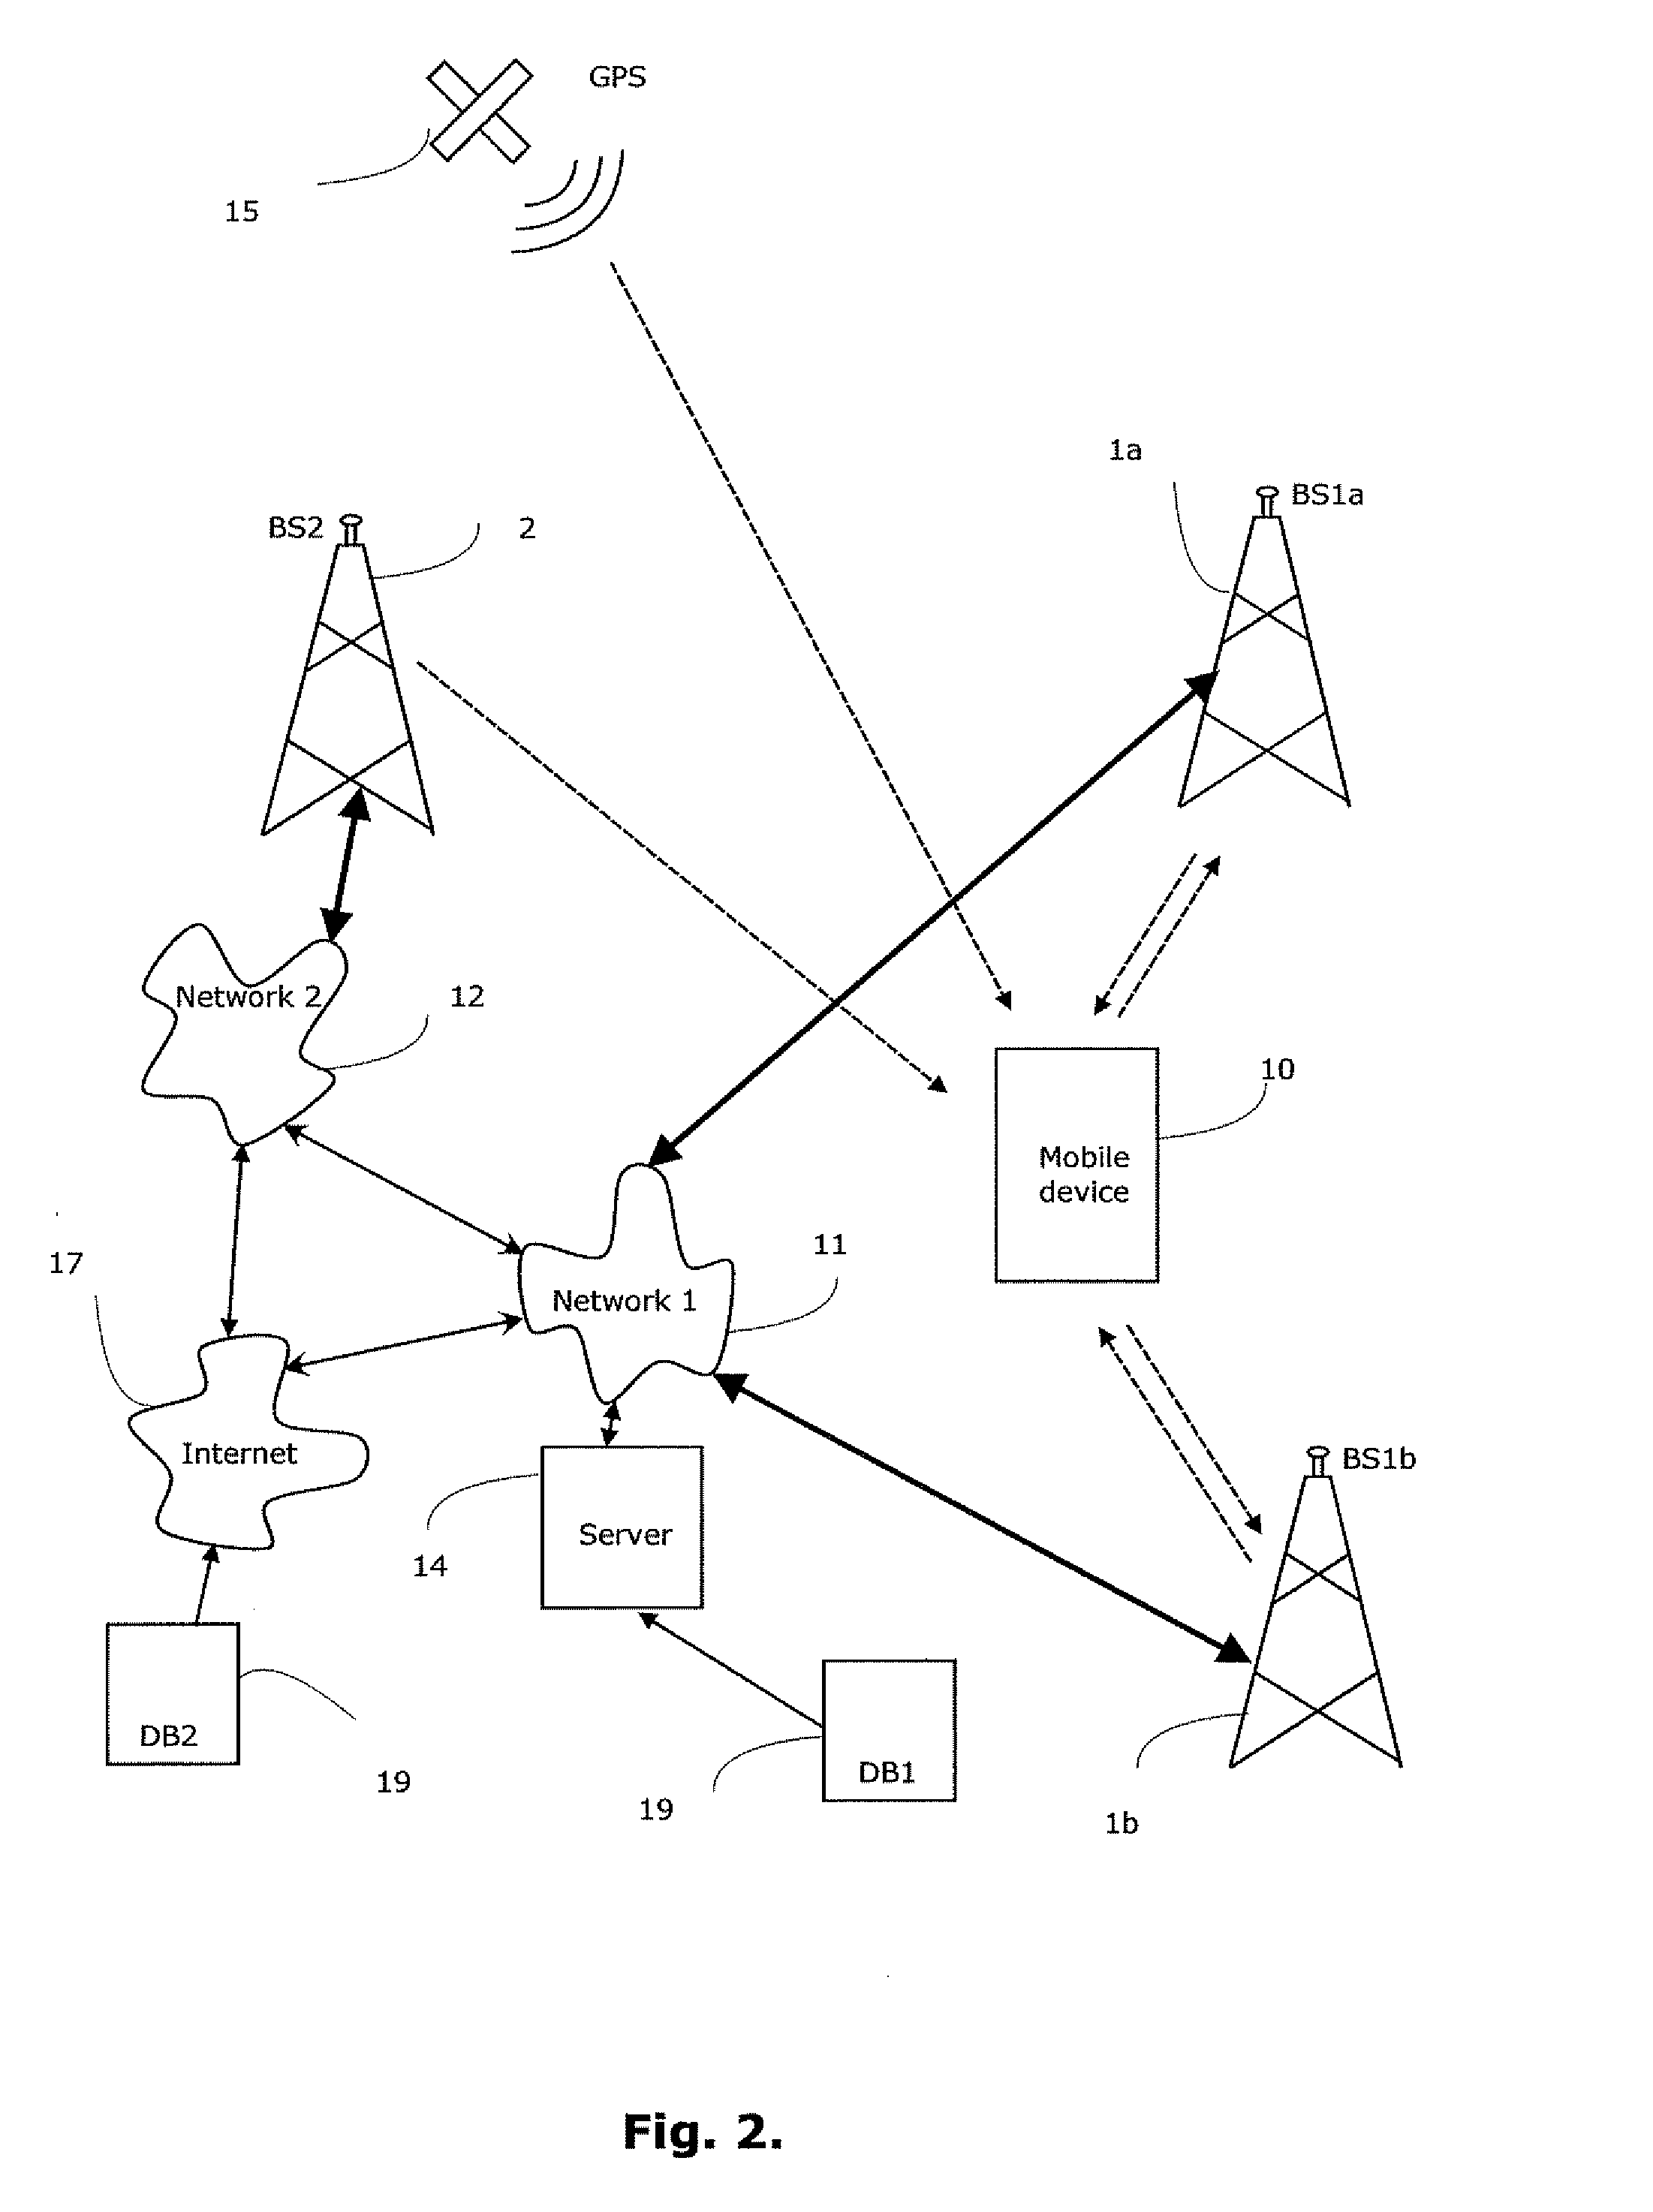 Method and system for refining accuracy of location positioning